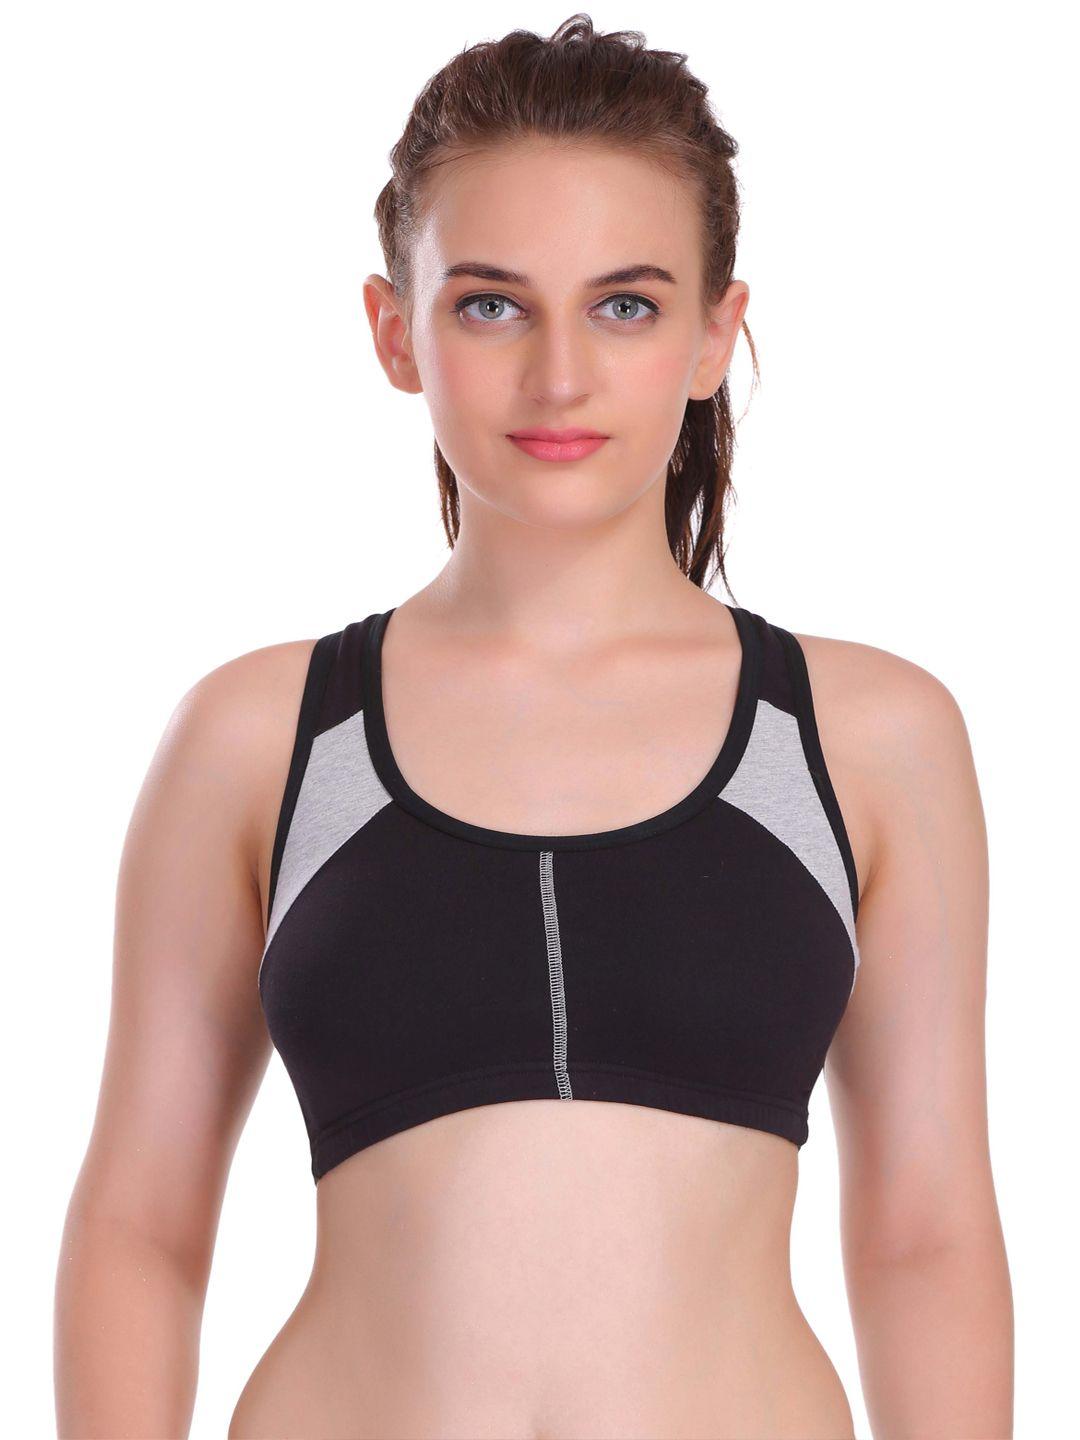 eve's-beauty-colourblocked-full-coverage-bra-with-all-day-comfort